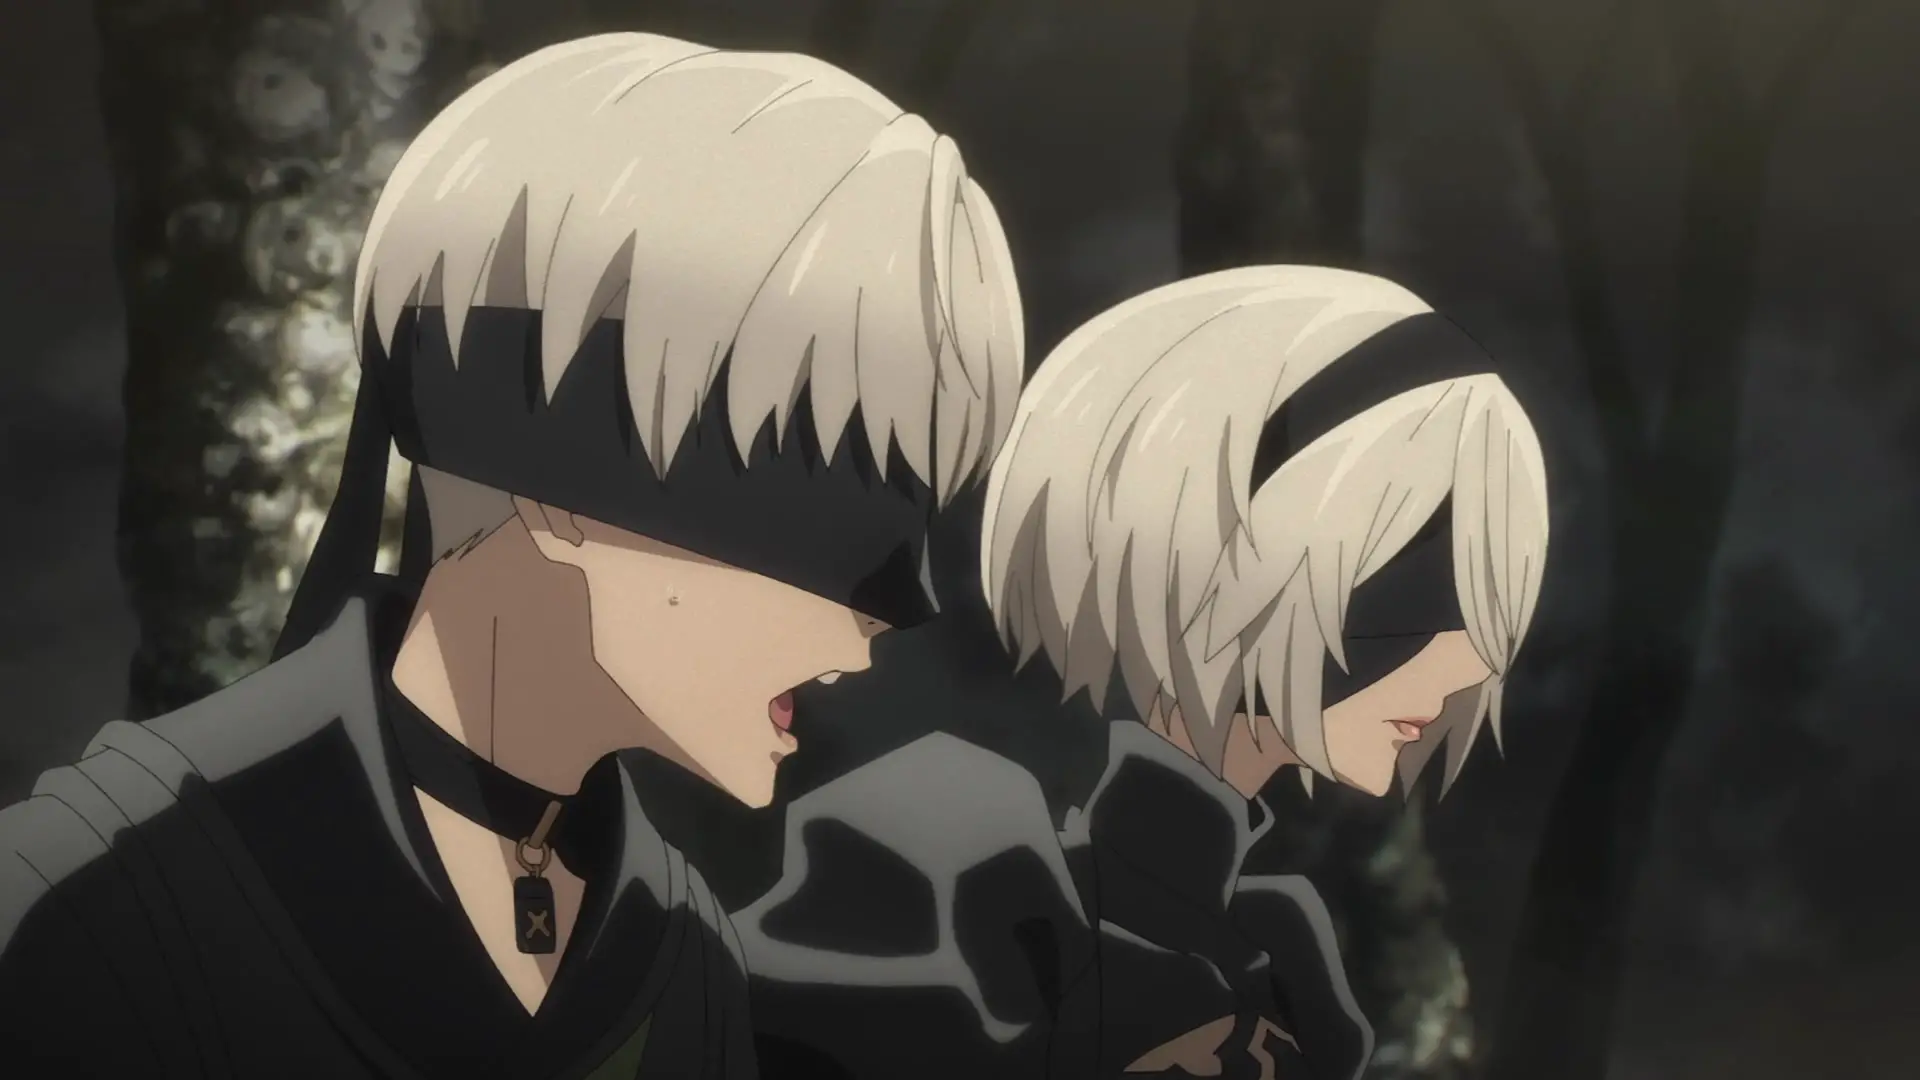 Unsurprisingly, the Nier Automata anime is stuffed with secret codes that  fans are already deciphering | PC Gamer